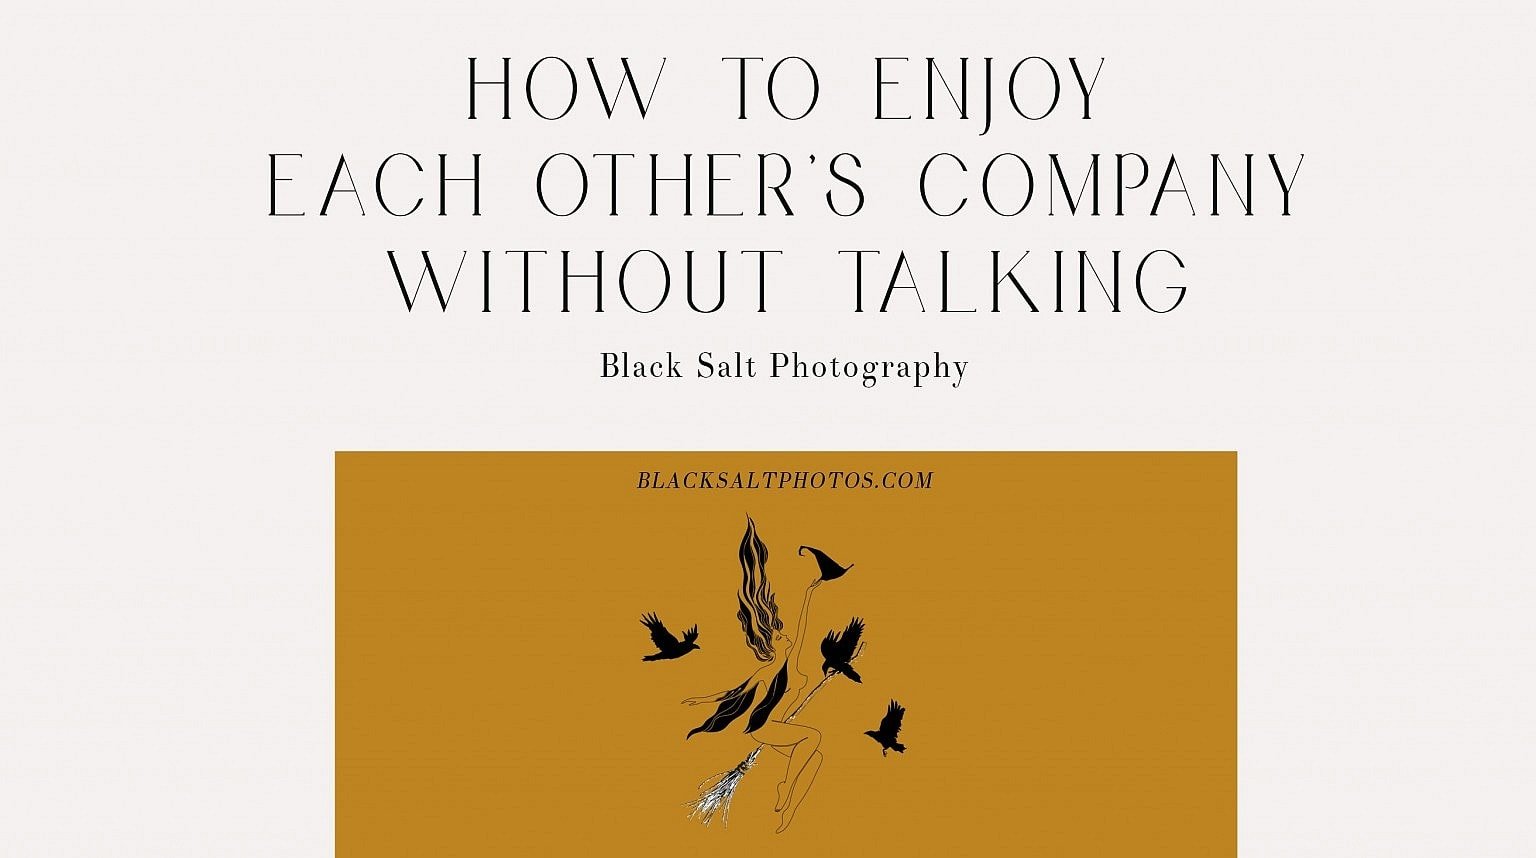 Tips on how to enjoy each other's company without talking